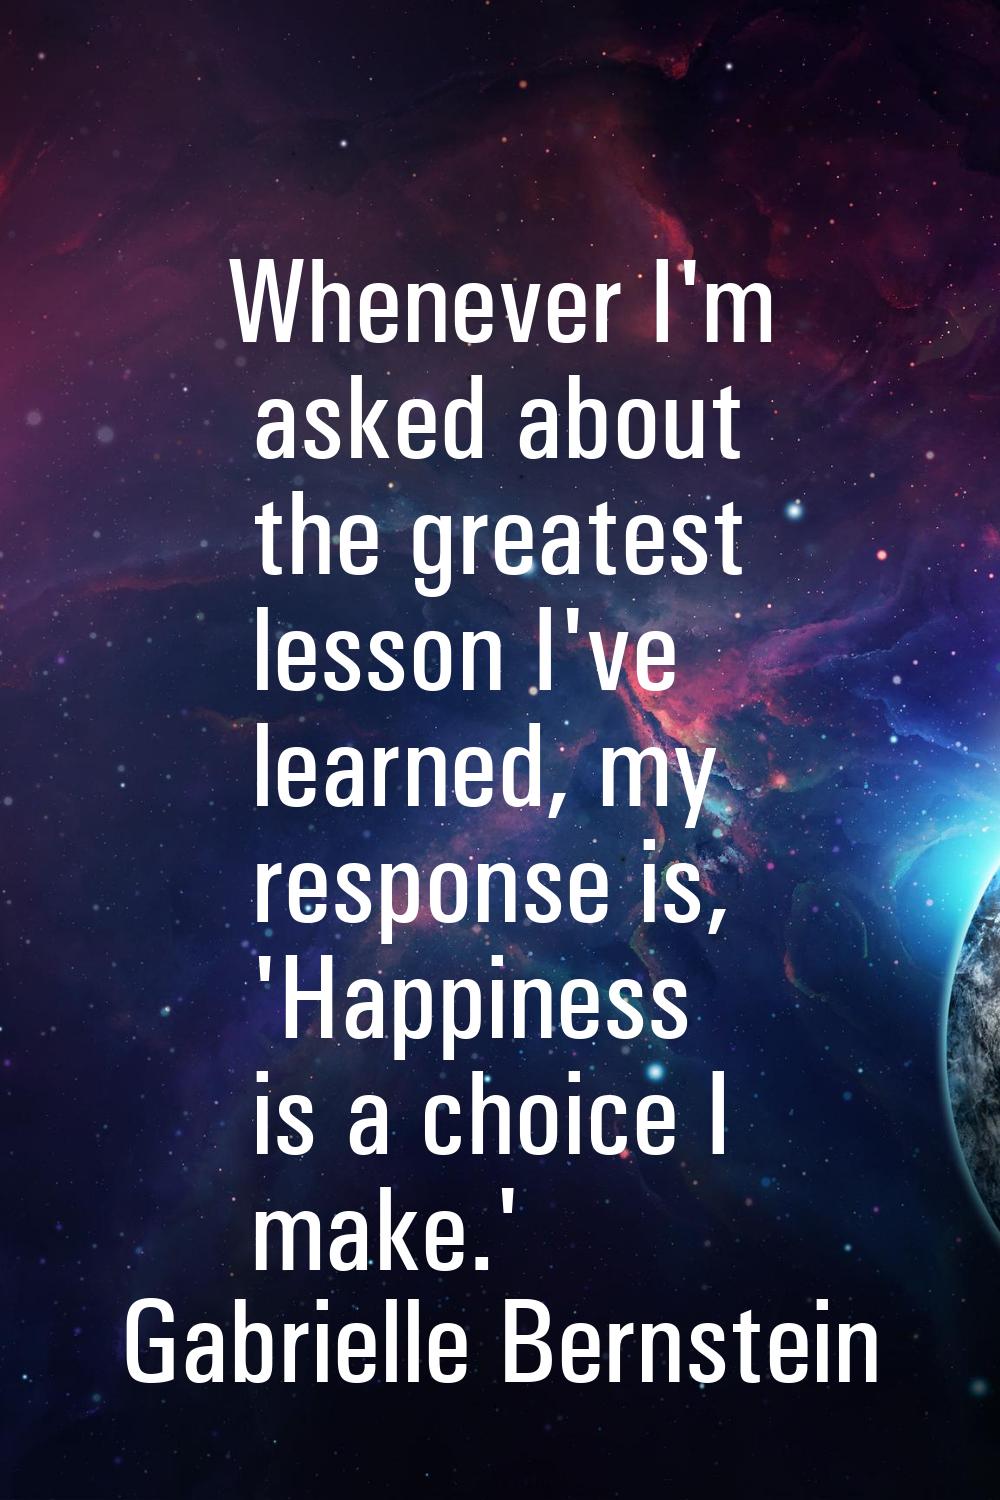 Whenever I'm asked about the greatest lesson I've learned, my response is, 'Happiness is a choice I